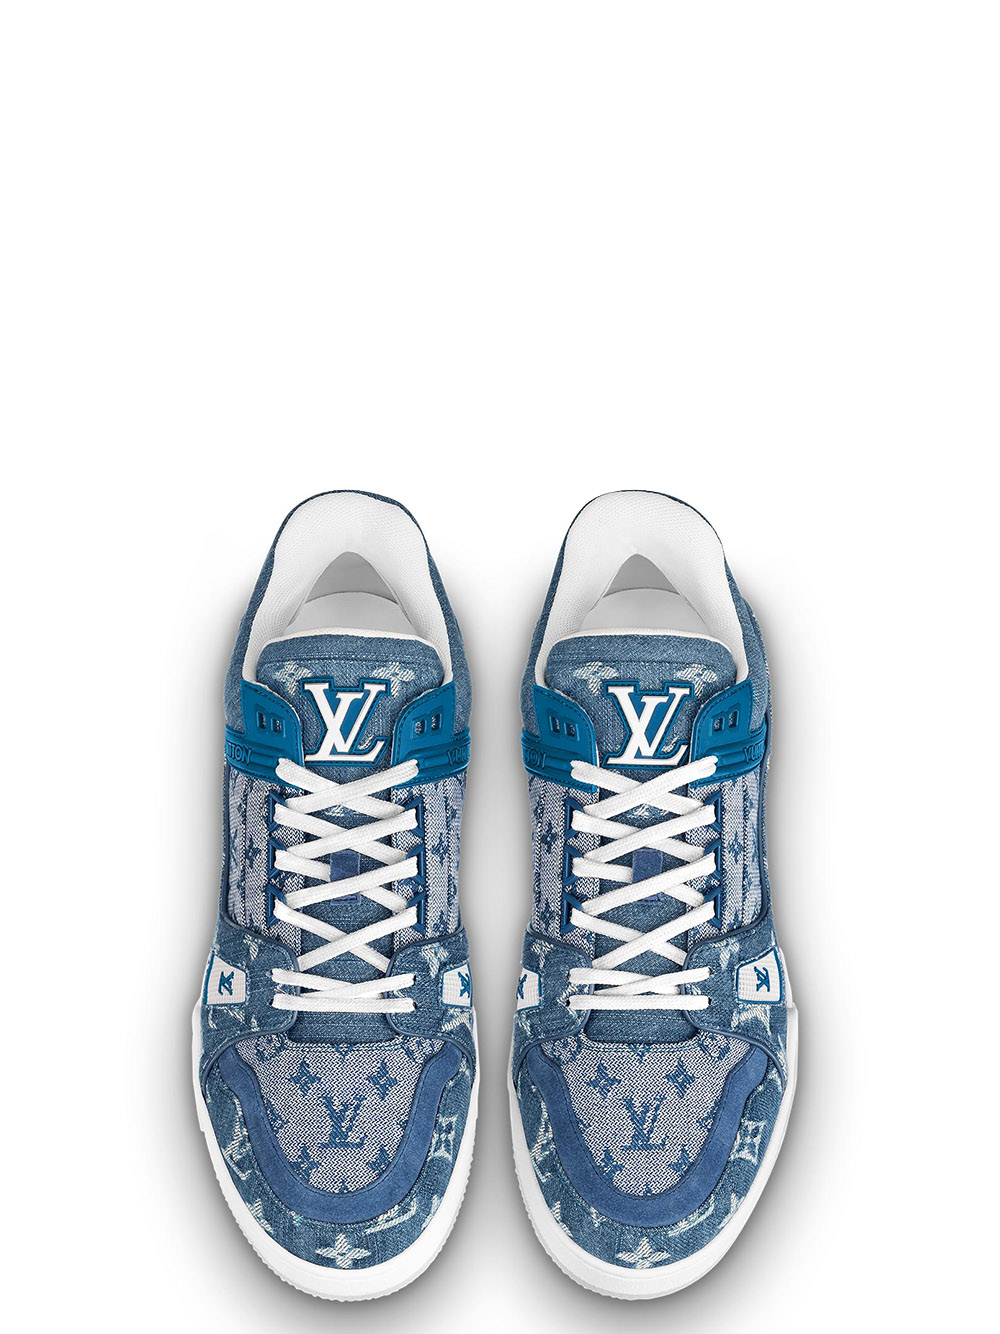 How To Authenticate Louis Vuitton Sneakers App | Literacy Ontario ...